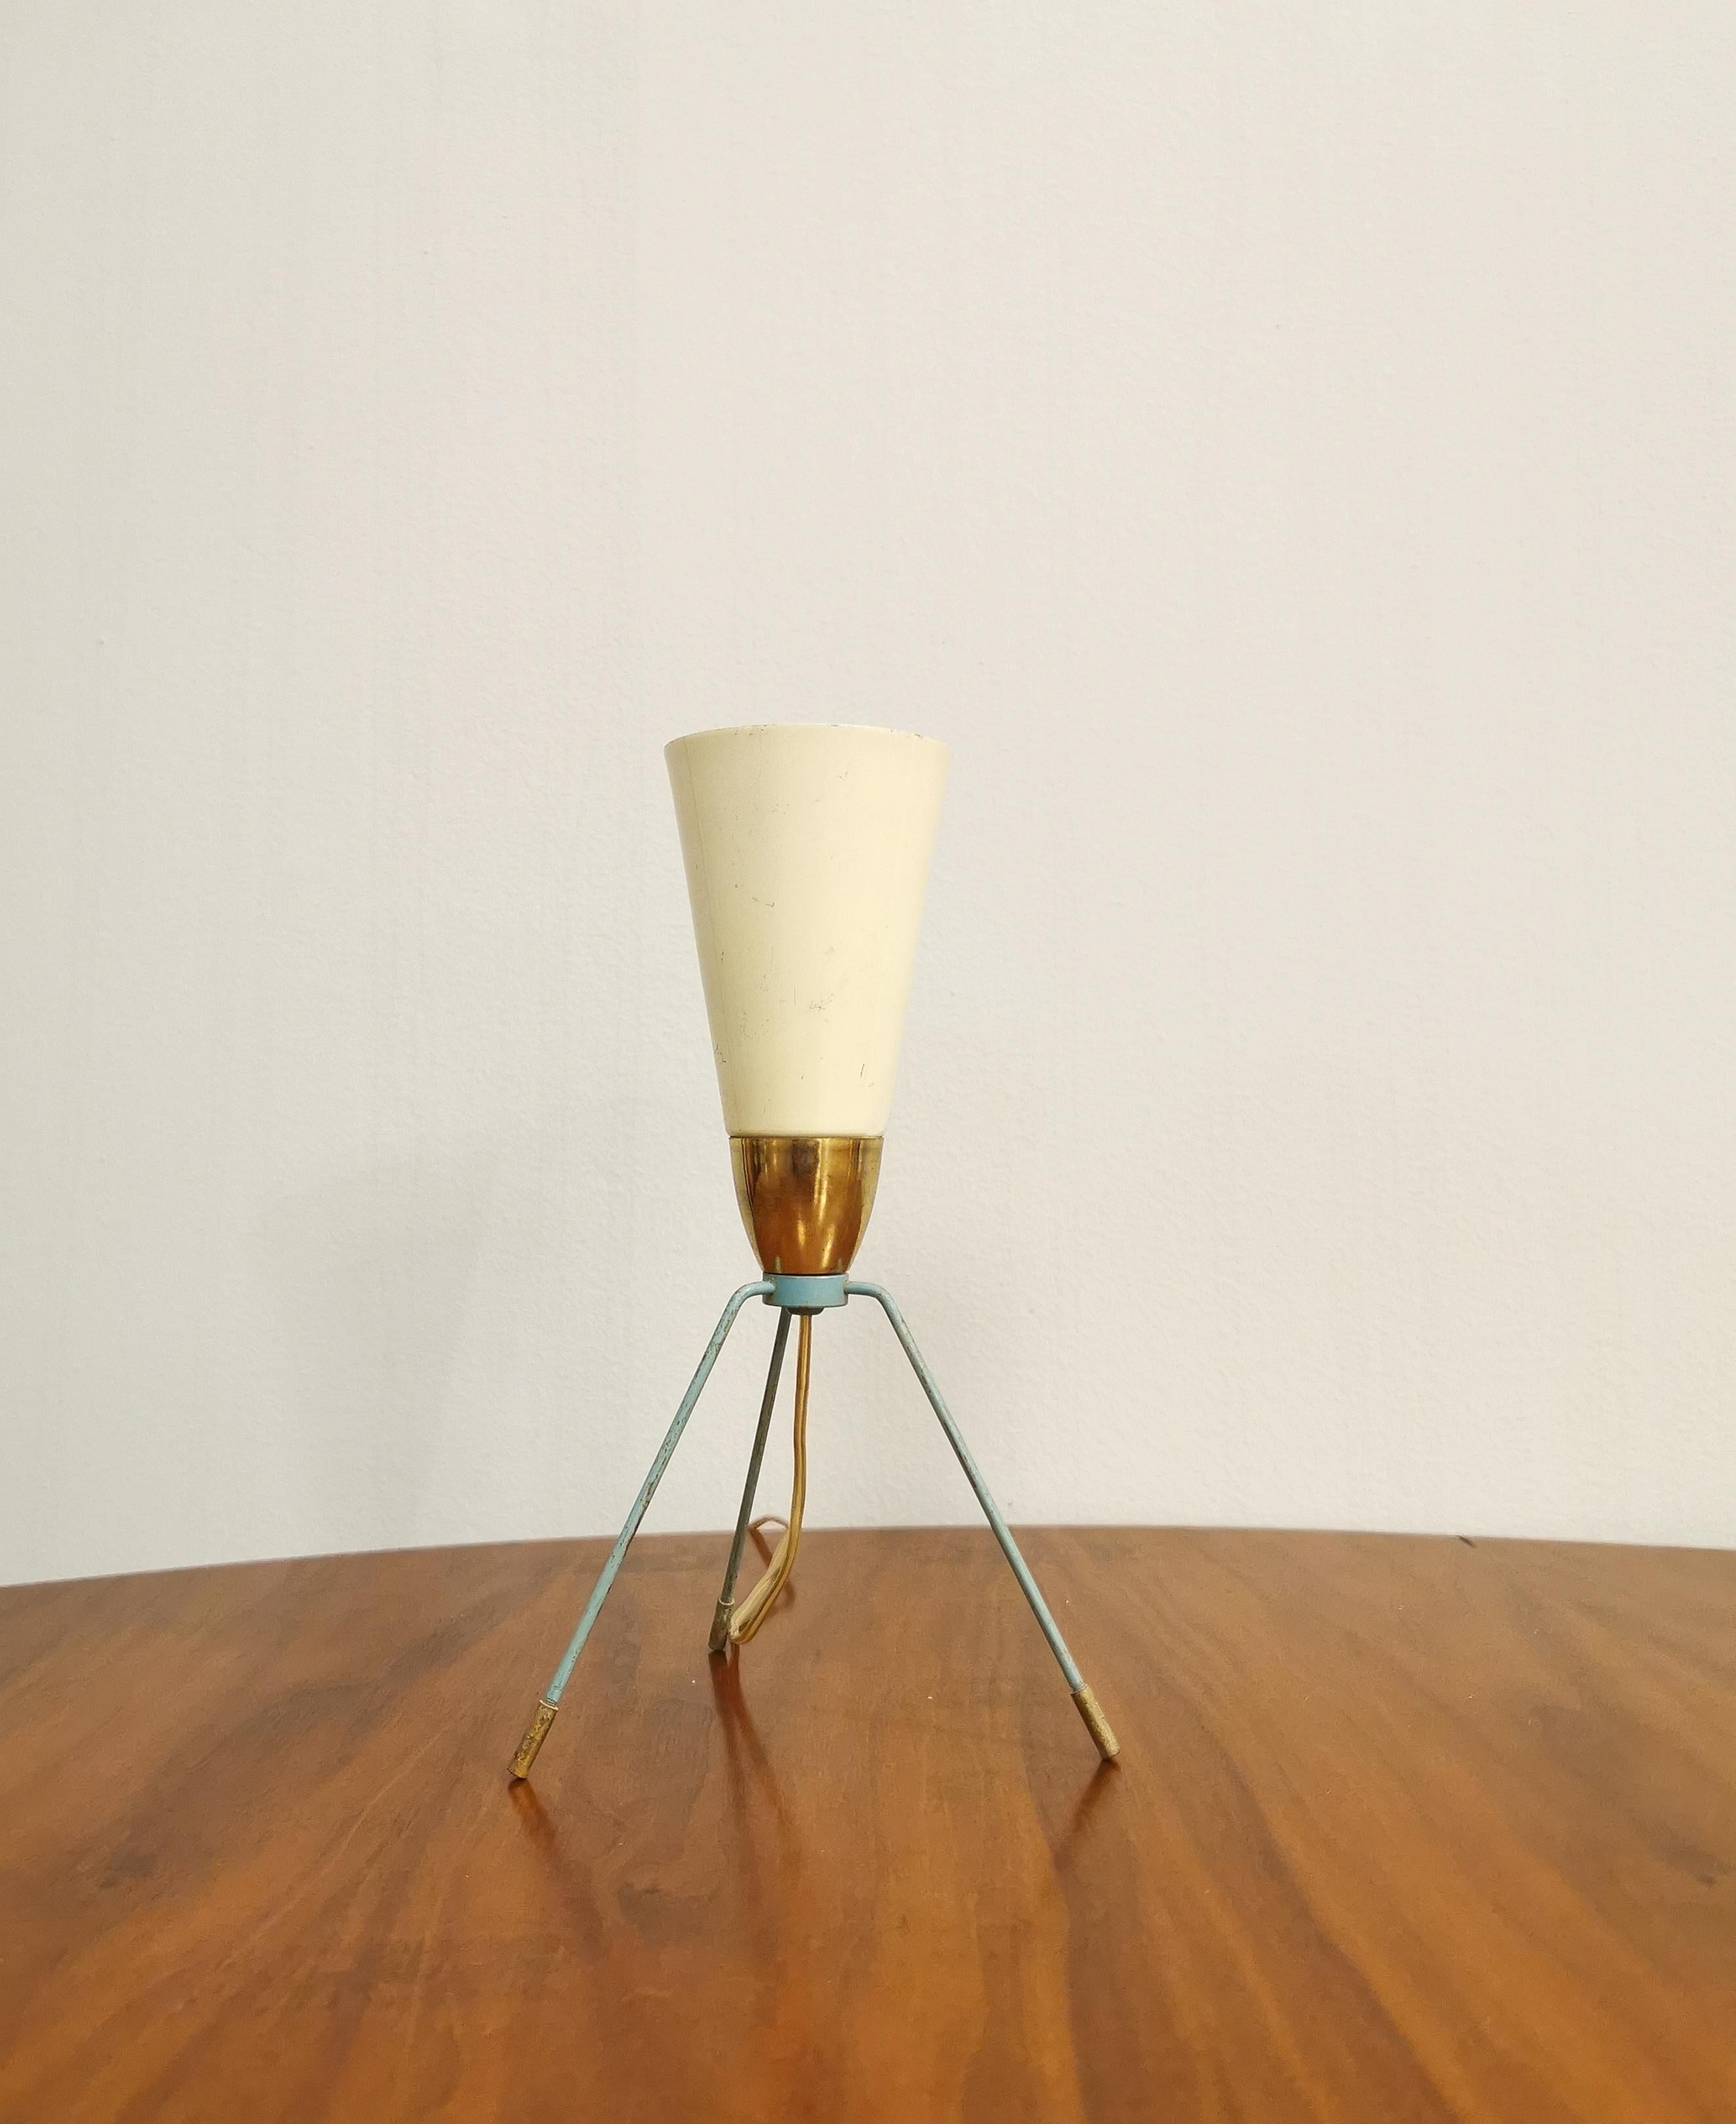 Table lamp by an unknown designer produced in the 1950s in Italy. The E14 1-light lamp has a tripod structure in light blue enamelled brass and brass, which supports a conical diffuser in cream enamelled aluminum.